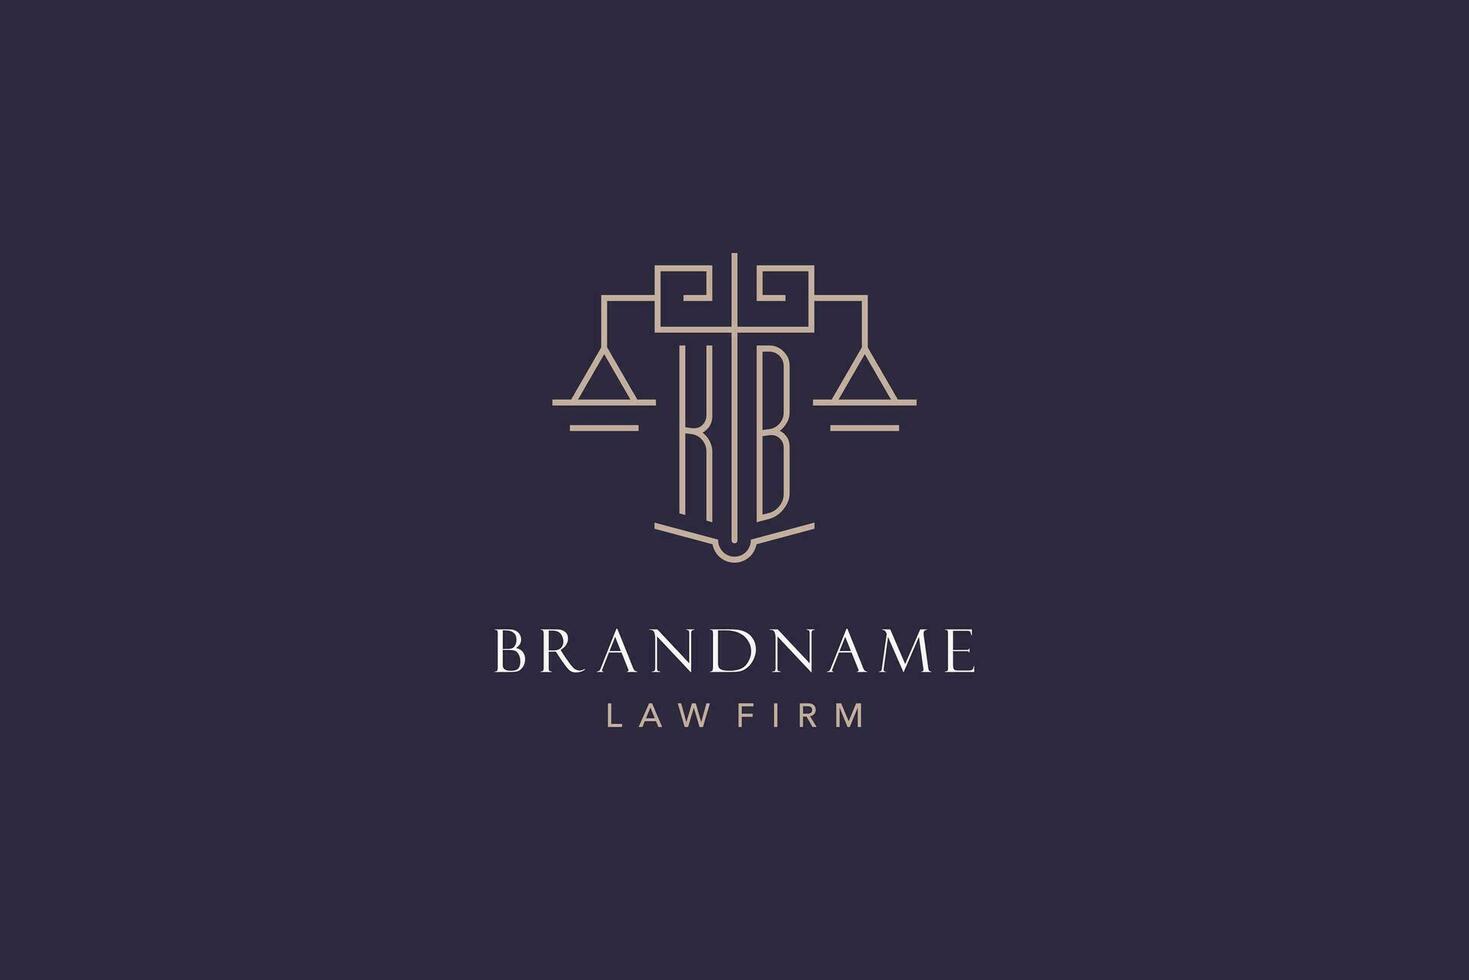 Initial letter KB logo with scale of justice logo design, luxury legal logo geometric style vector